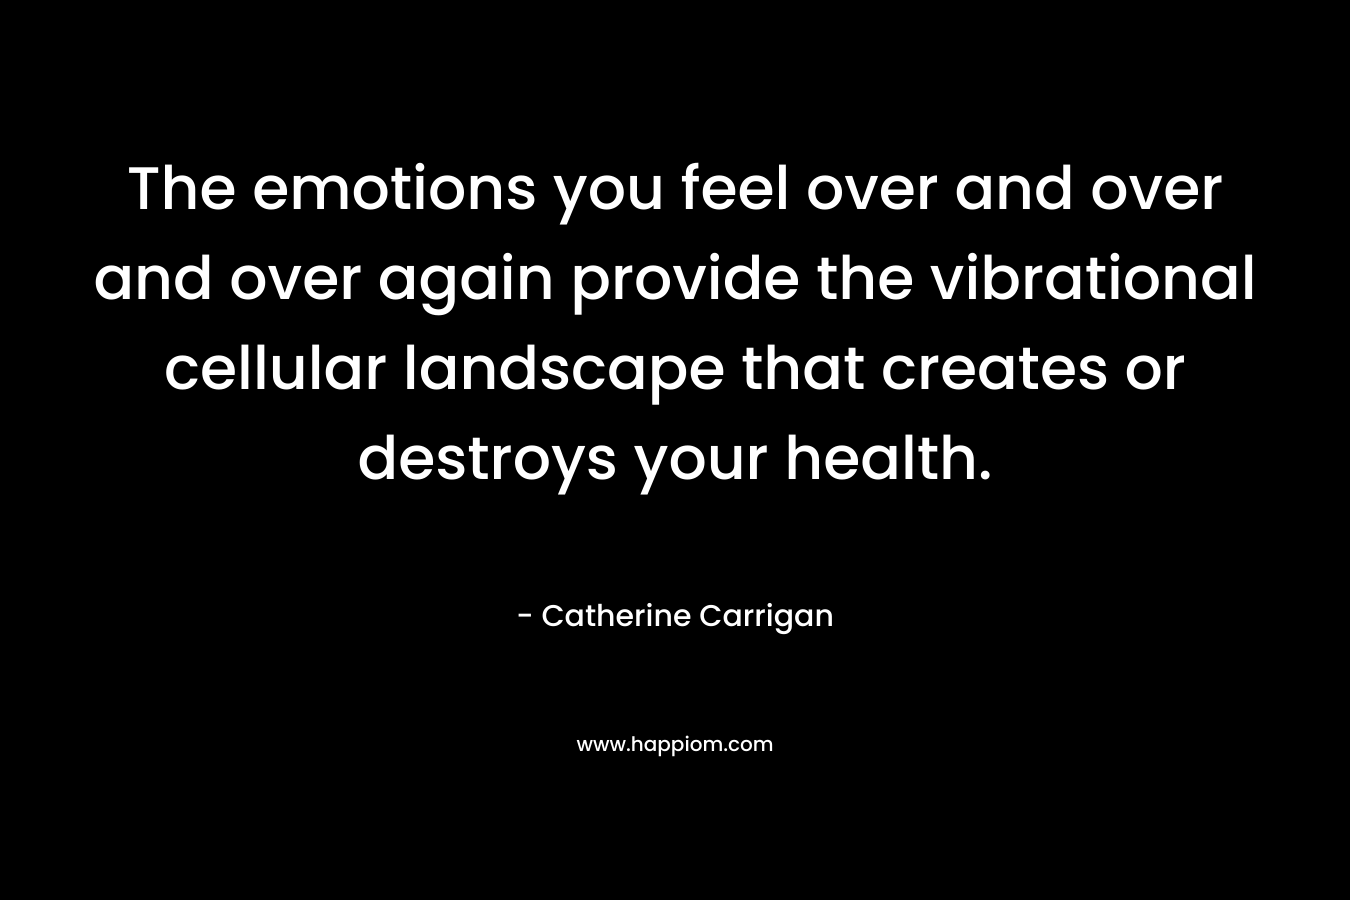 The emotions you feel over and over and over again provide the vibrational cellular landscape that creates or destroys your health. – Catherine Carrigan